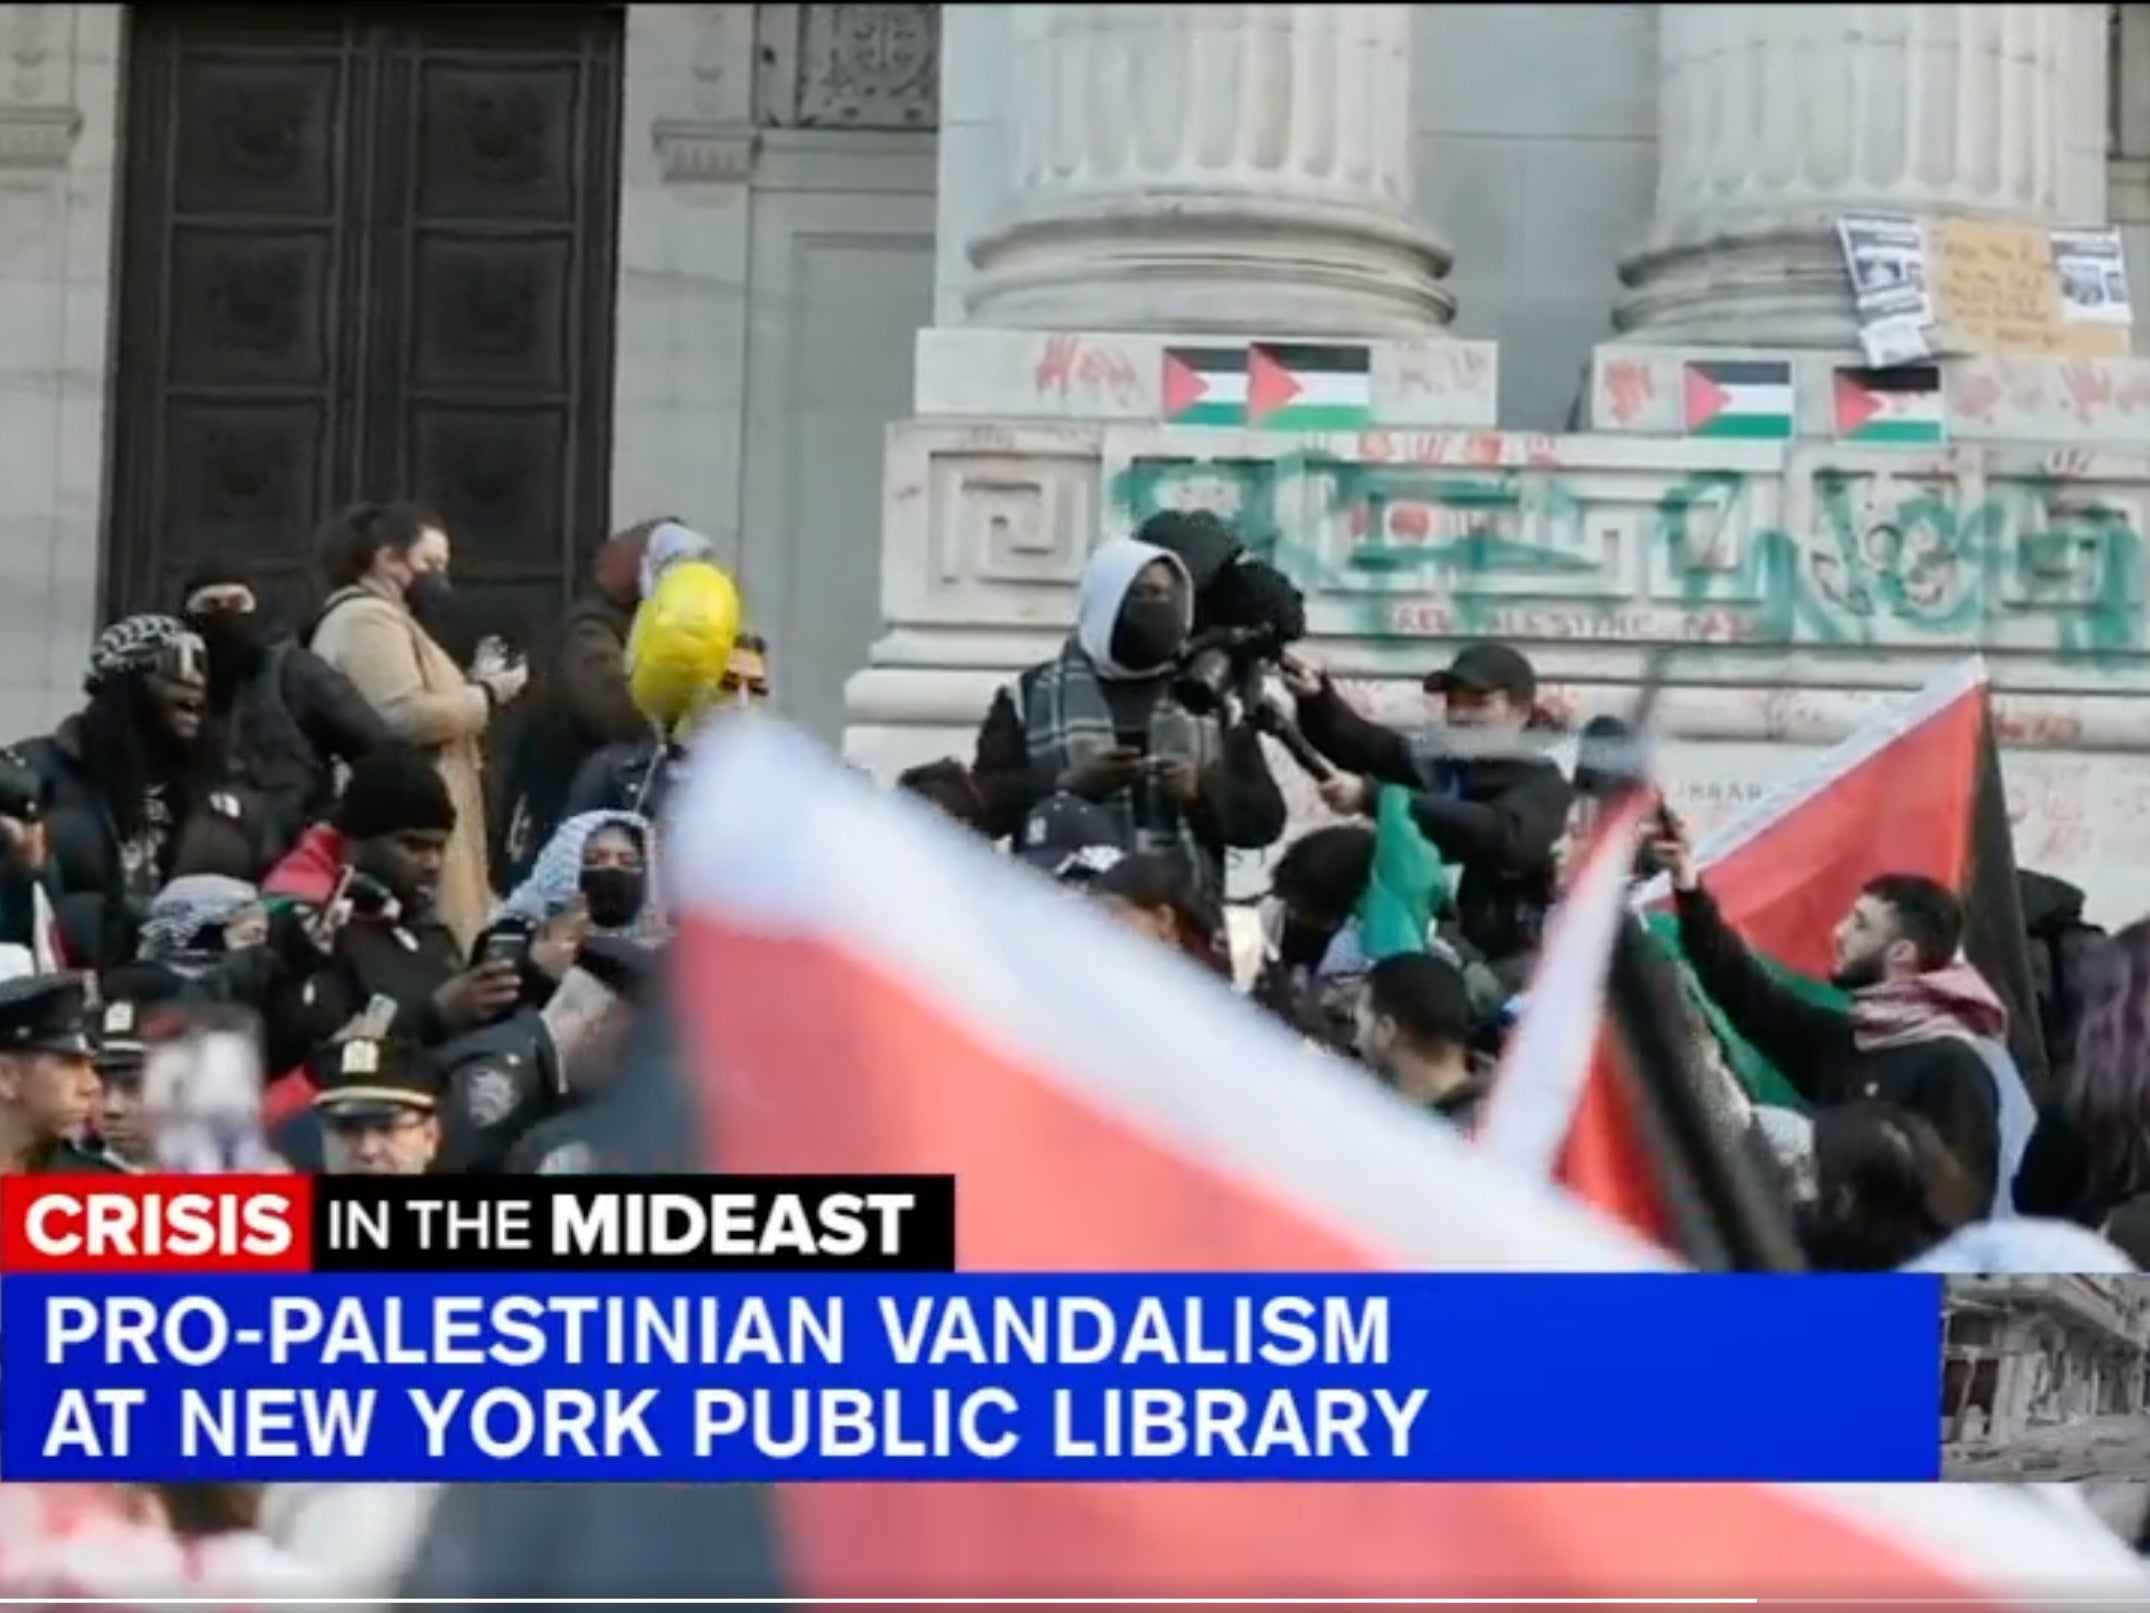 Demonstrators defaced New York Public Library in pro-Palestine protest